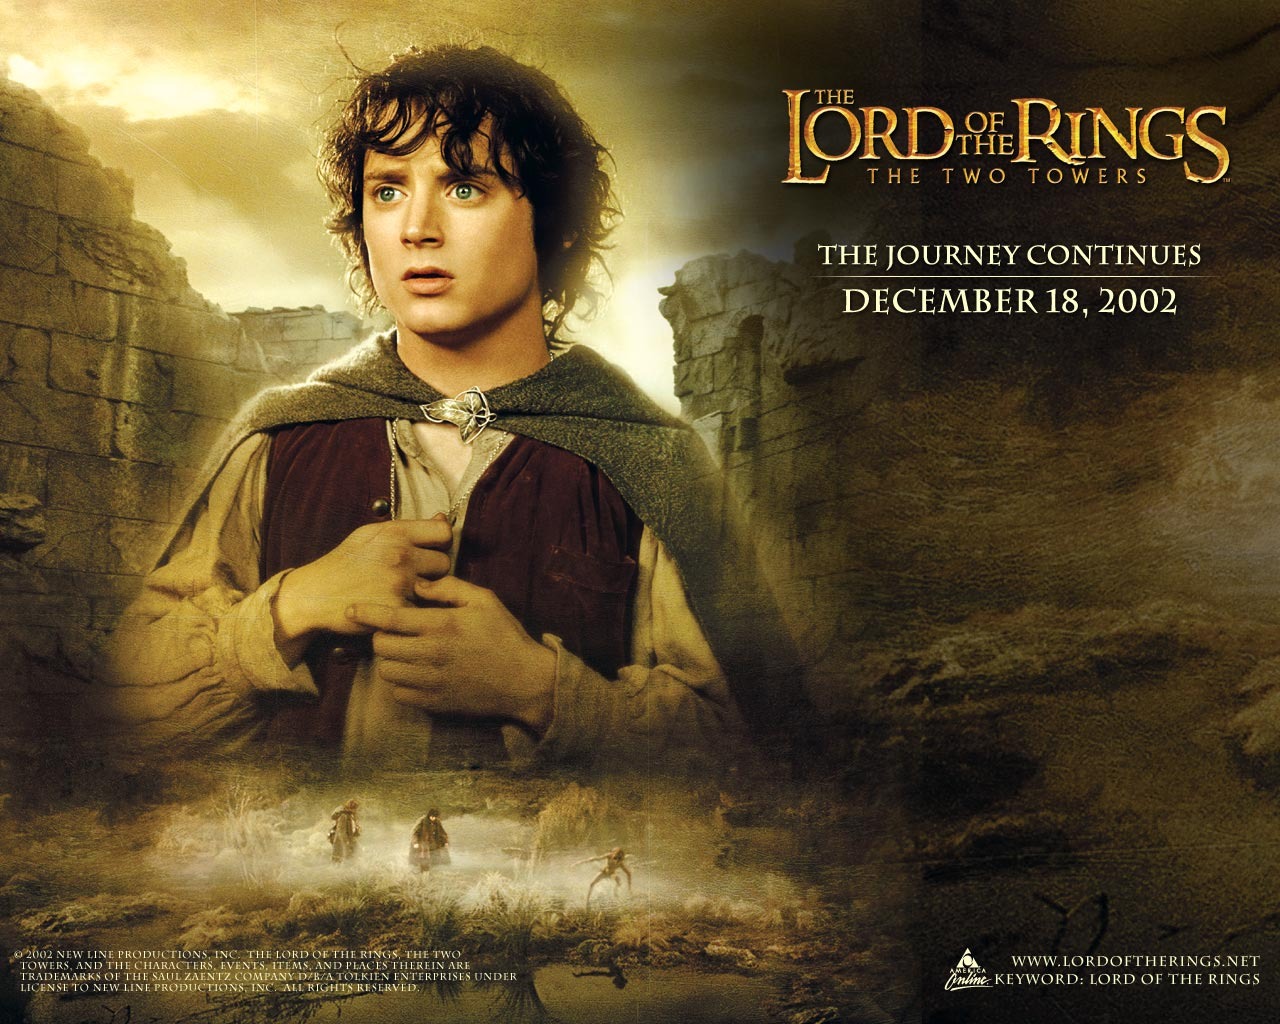 The Lord of the Rings wallpaper #1 - 1280x1024